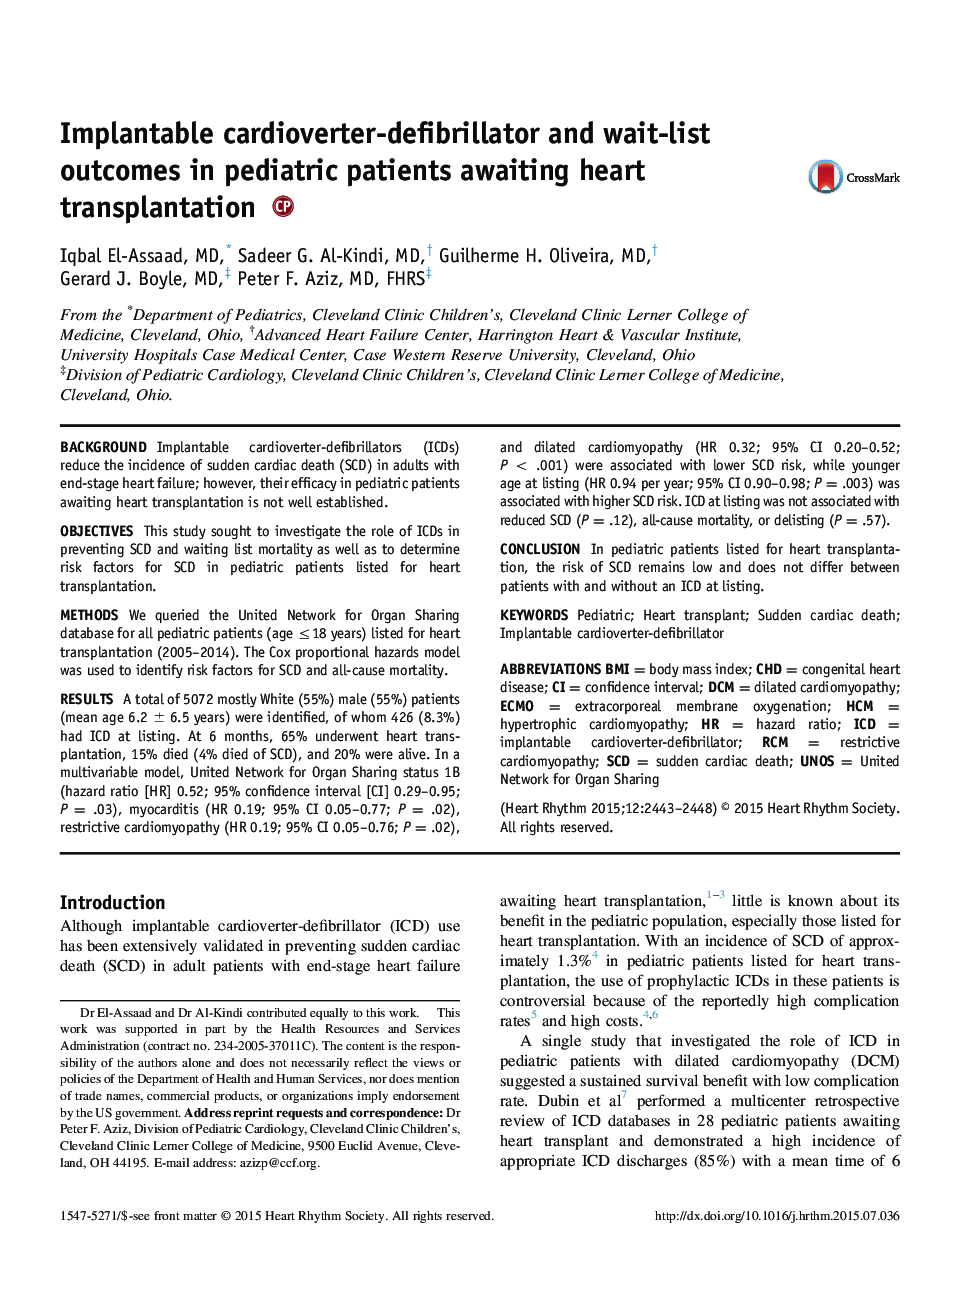 Implantable cardioverter-defibrillator and wait-list outcomes in pediatric patients awaiting heart transplantation 